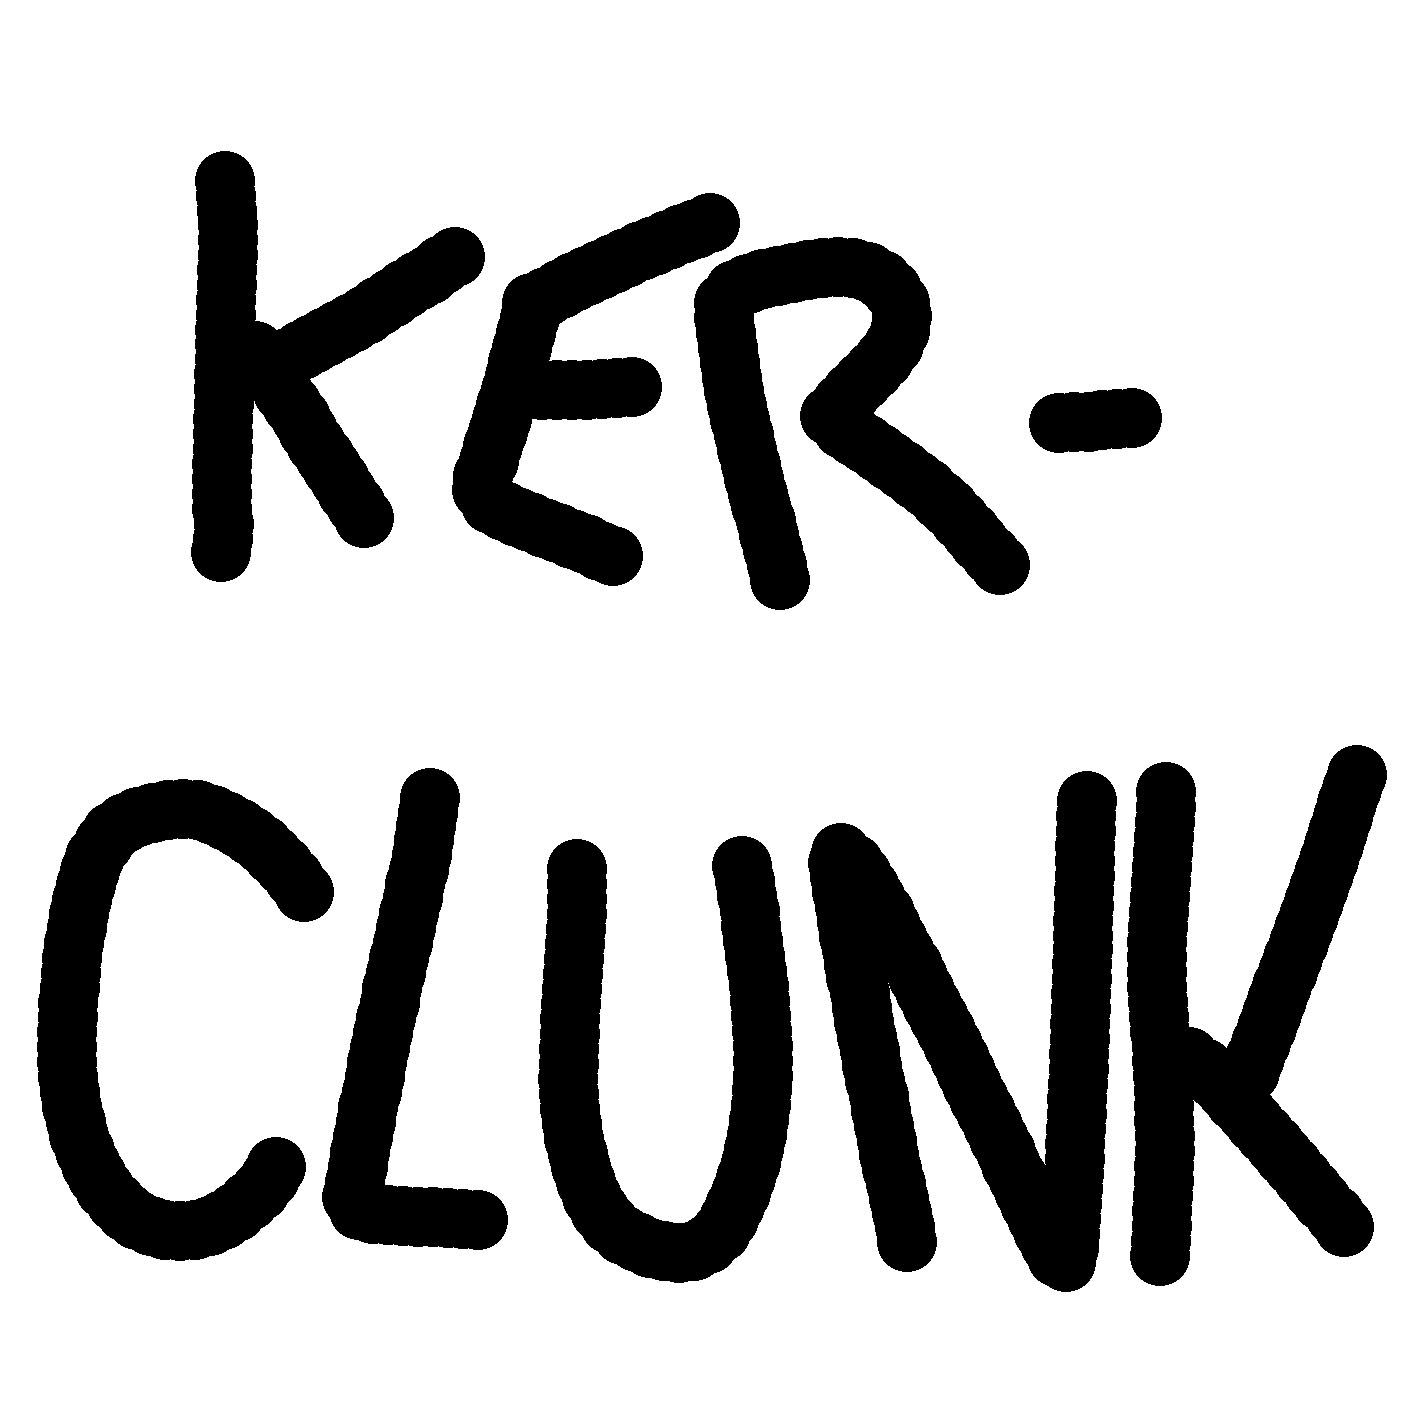 Another brief message. Ker-Clunk.